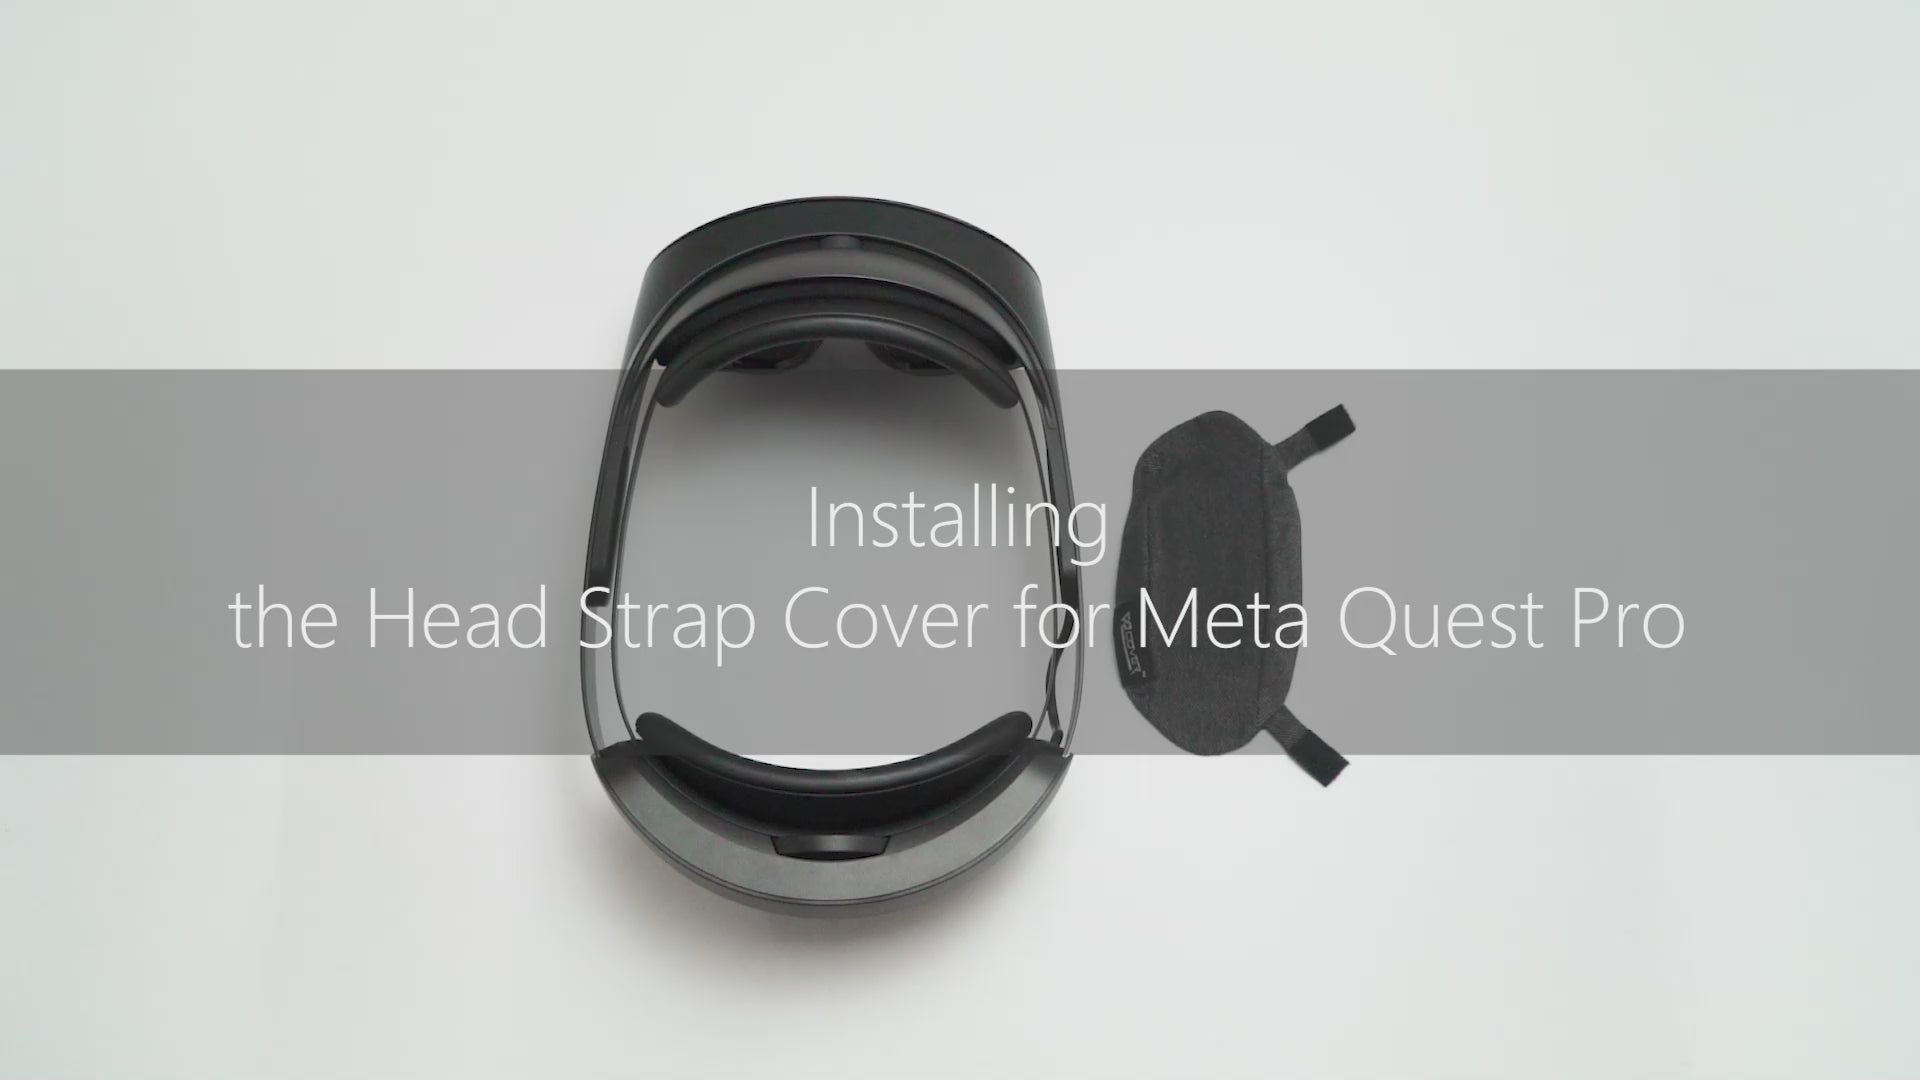 Installation video for Head Strap Cover for Meta Quest Pro